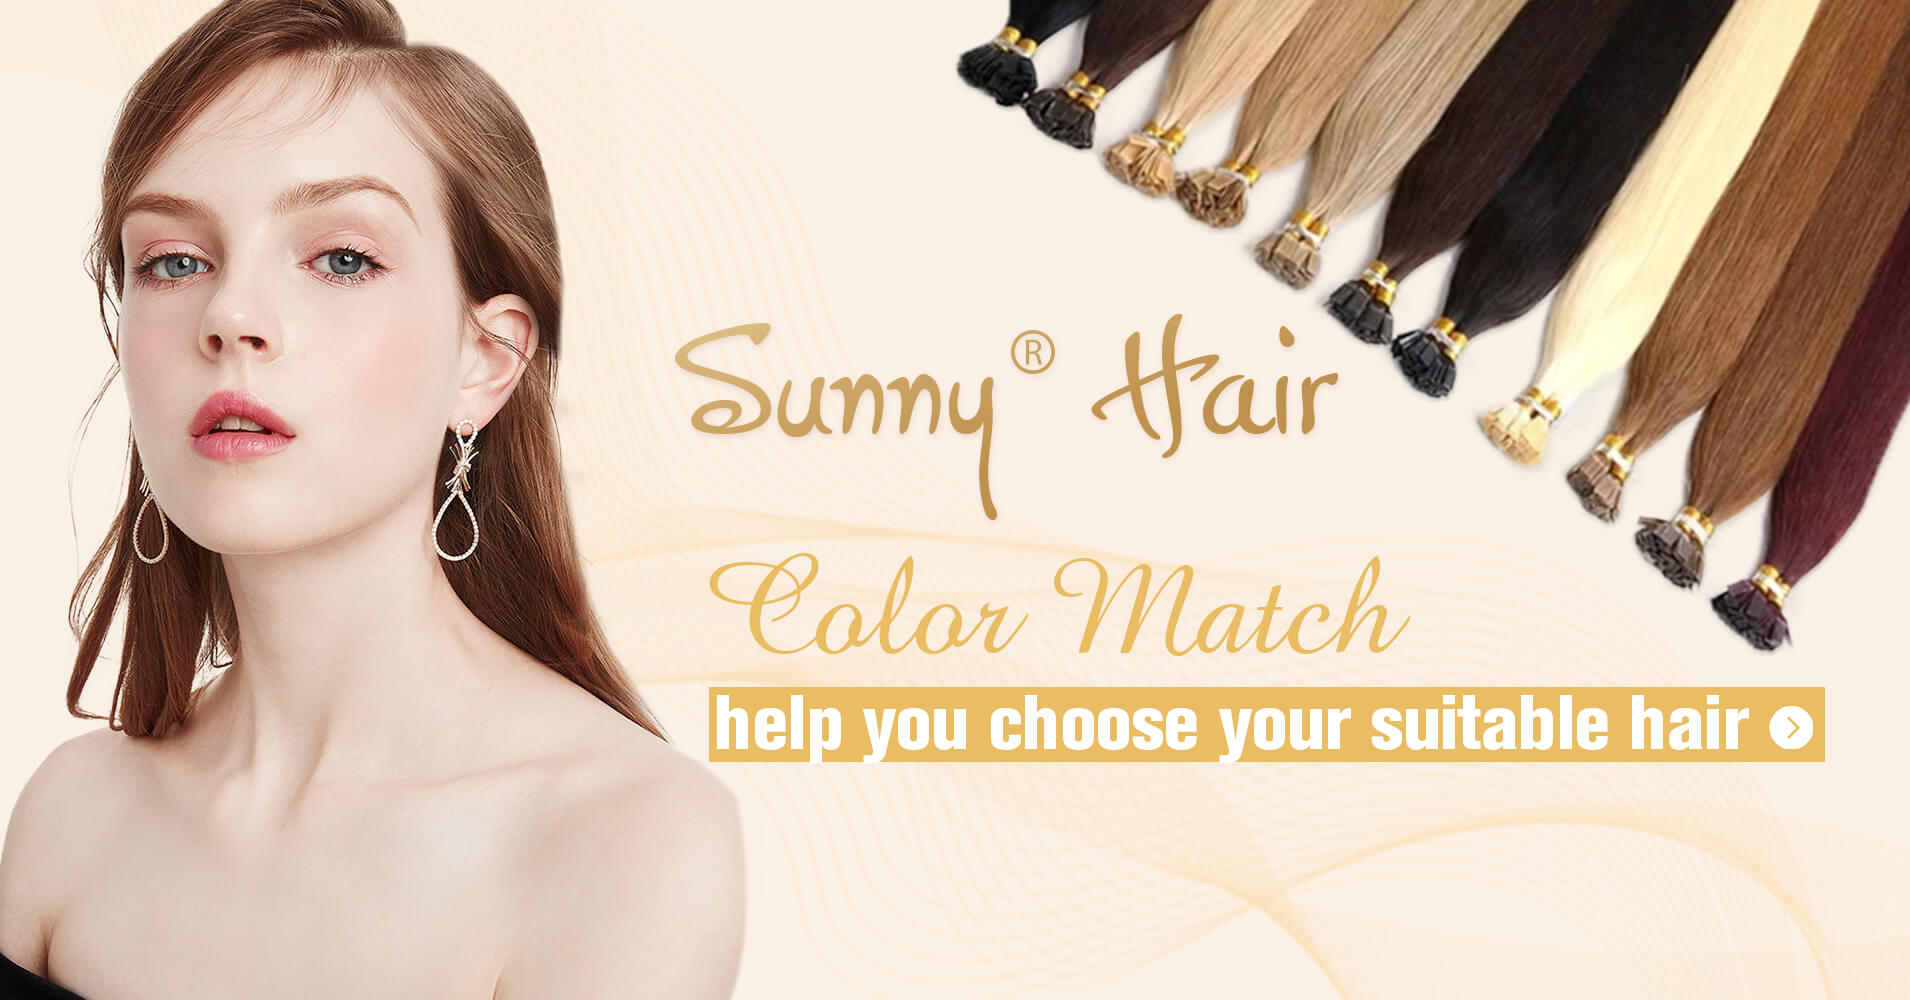 Sunny hair provide customer color match hand tied weft extensions,virgin hand tied hair,hand tied weft,hand tied weft hair extensions,sew in hair,weft sew in hair extensions,hair weft extensions,wefted human hair,sew in weft hair extensions human hair,braiding hair,hair bundle,hair weft